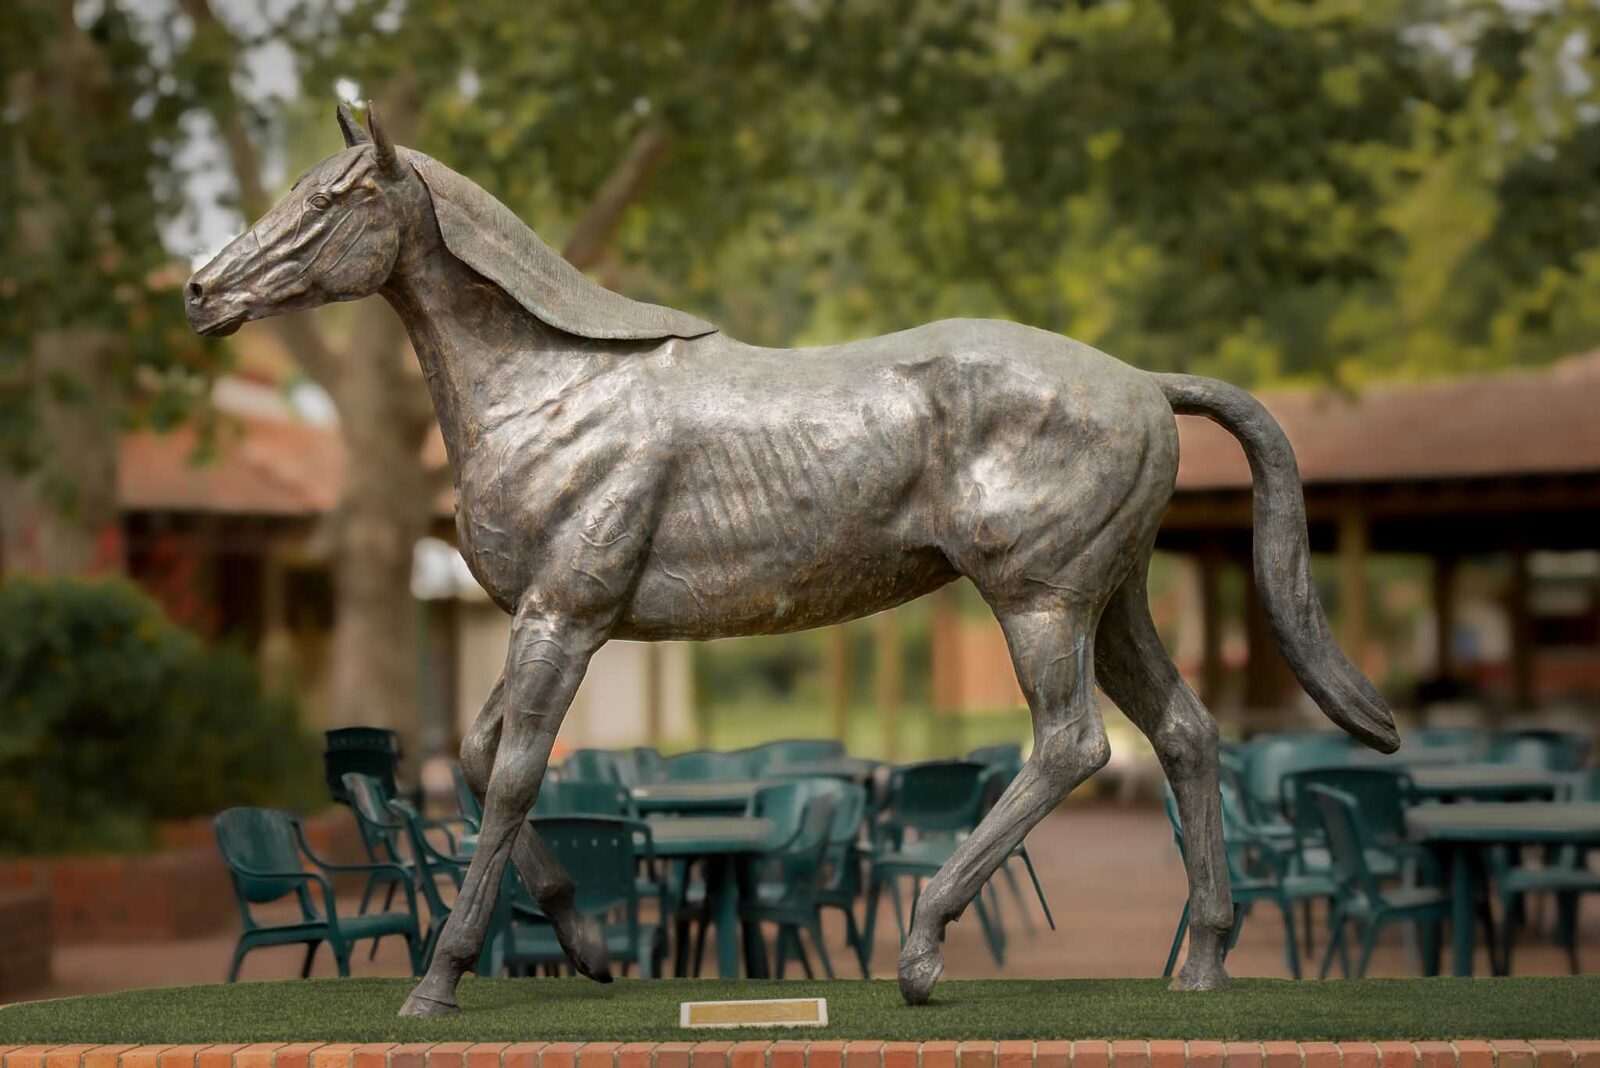 Life-size bronze sculpture of the horse, Northerly, by Robert C Hitchcock, at Ascot Racecourse in Perth Western Australia